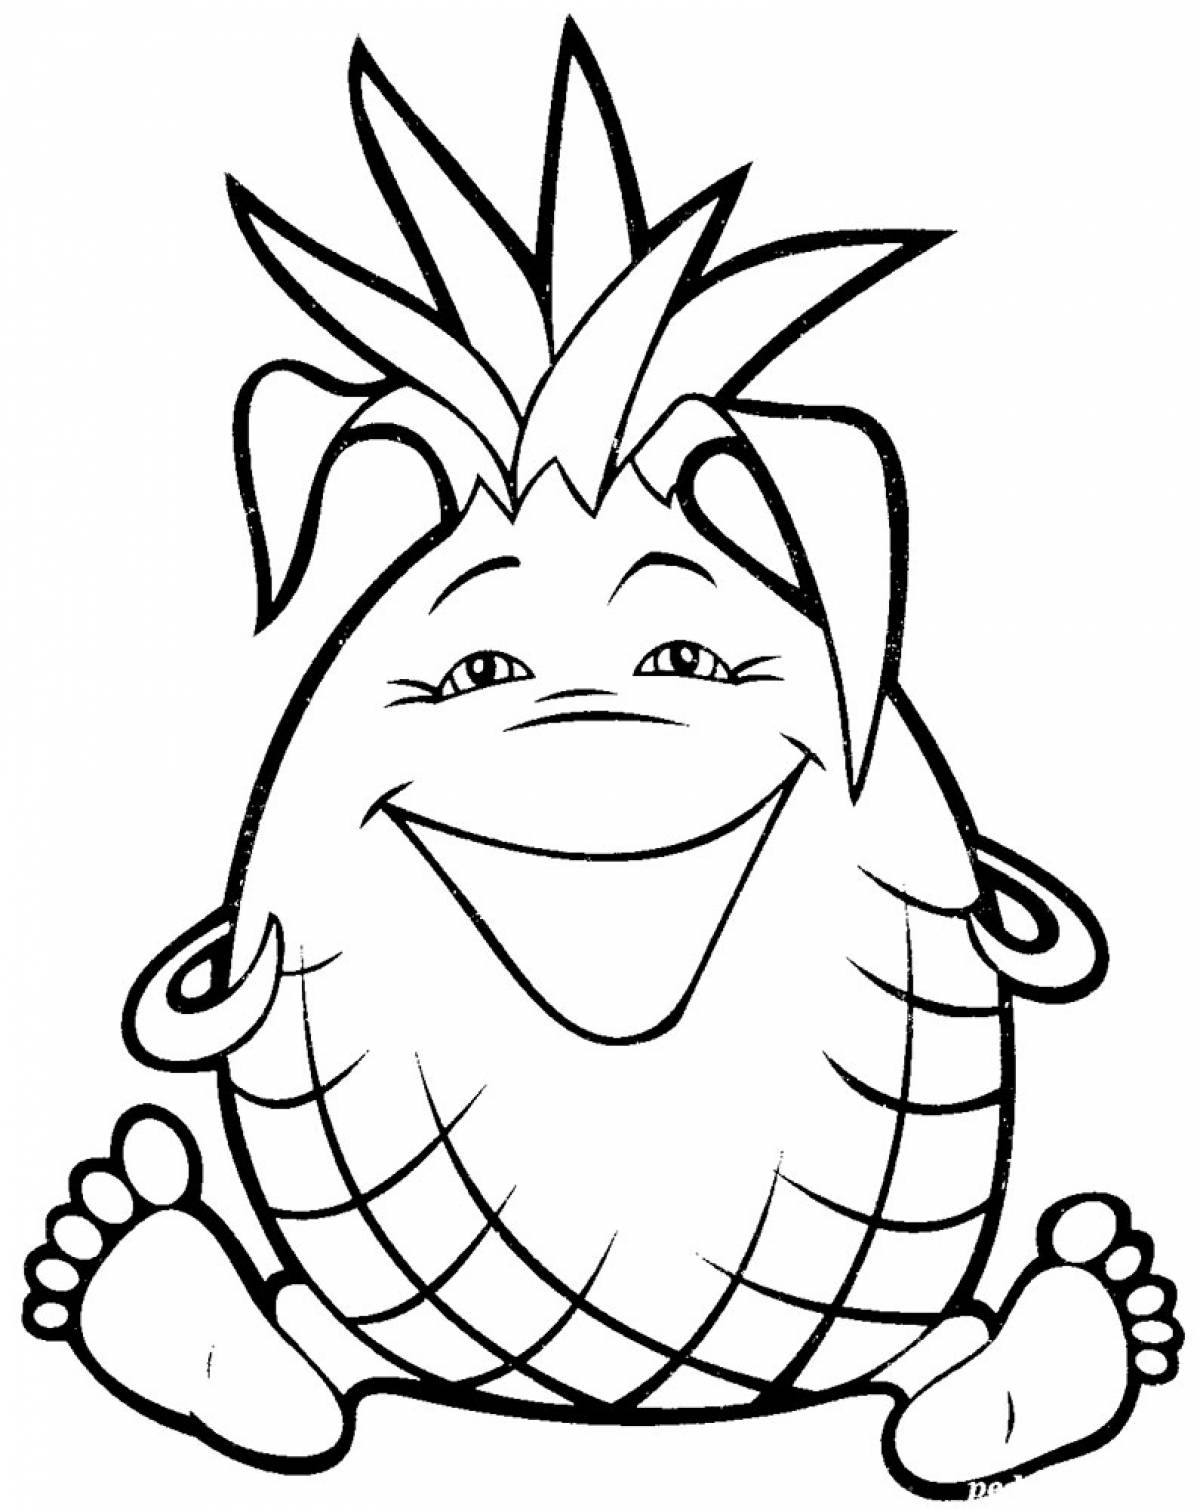 Pineapple laughing